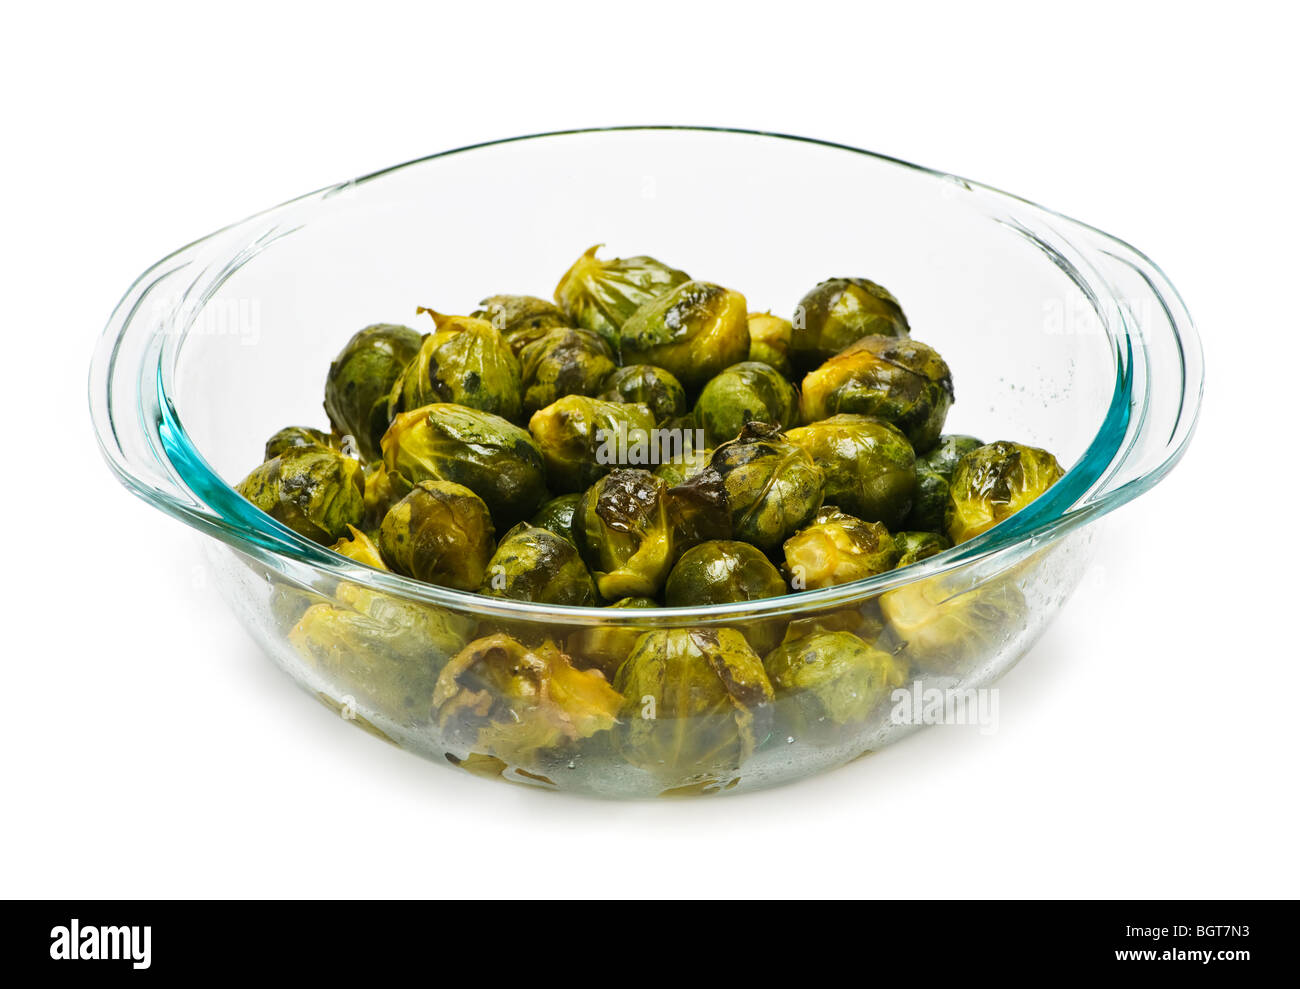 Casserole dish of roasted cooked green brussels sprouts Stock Photo